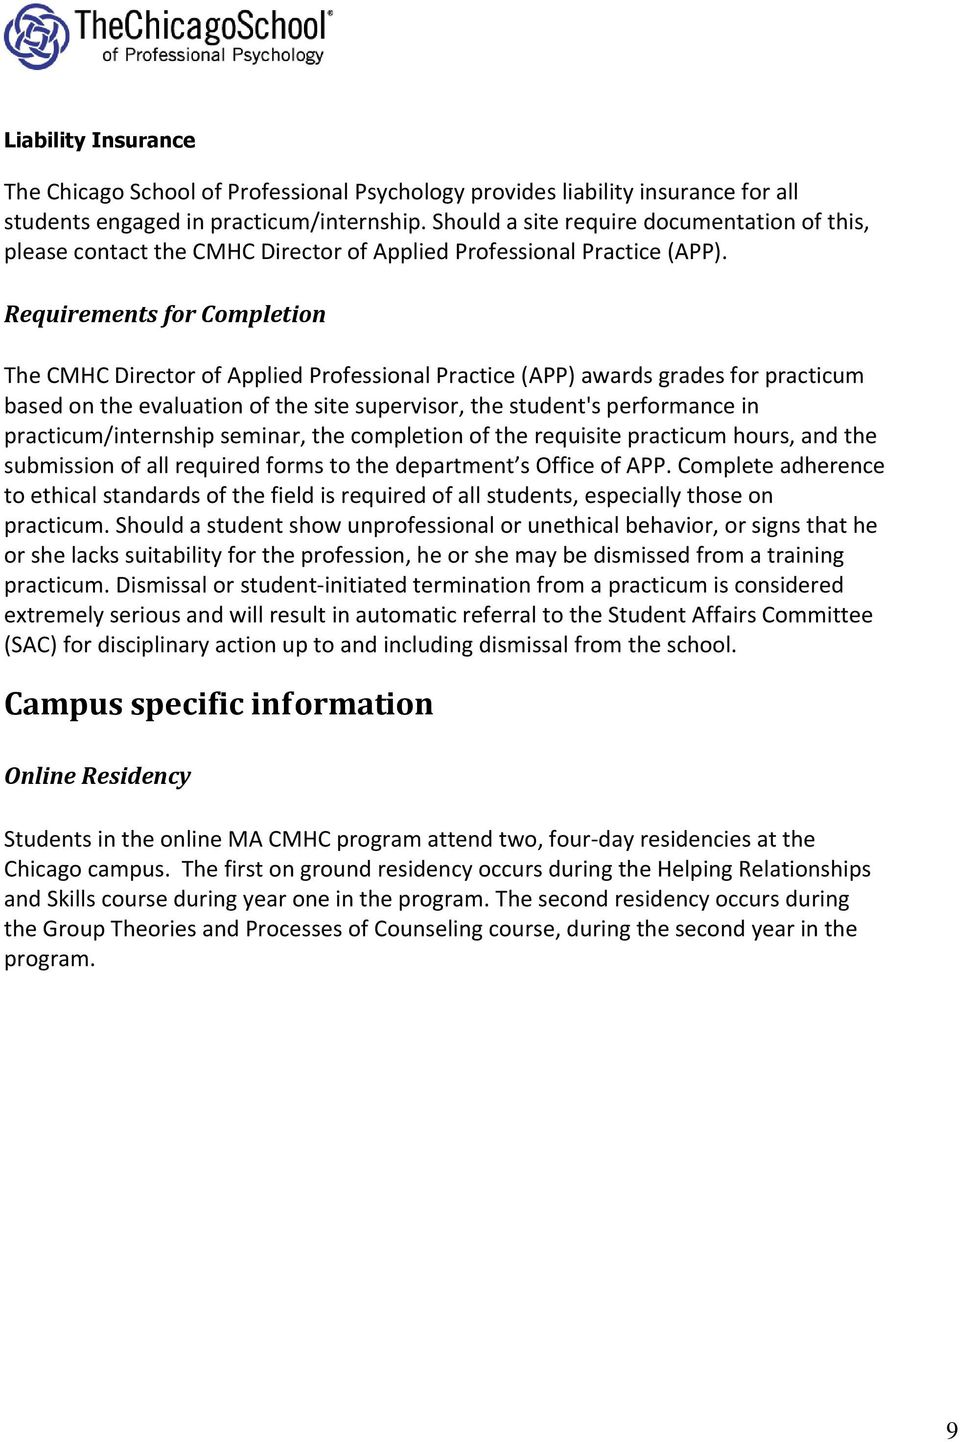 Requirements for Completion The CMHC Director of Applied Professional Practice (APP) awards grades for practicum based on the evaluation of the site supervisor, the student's performance in